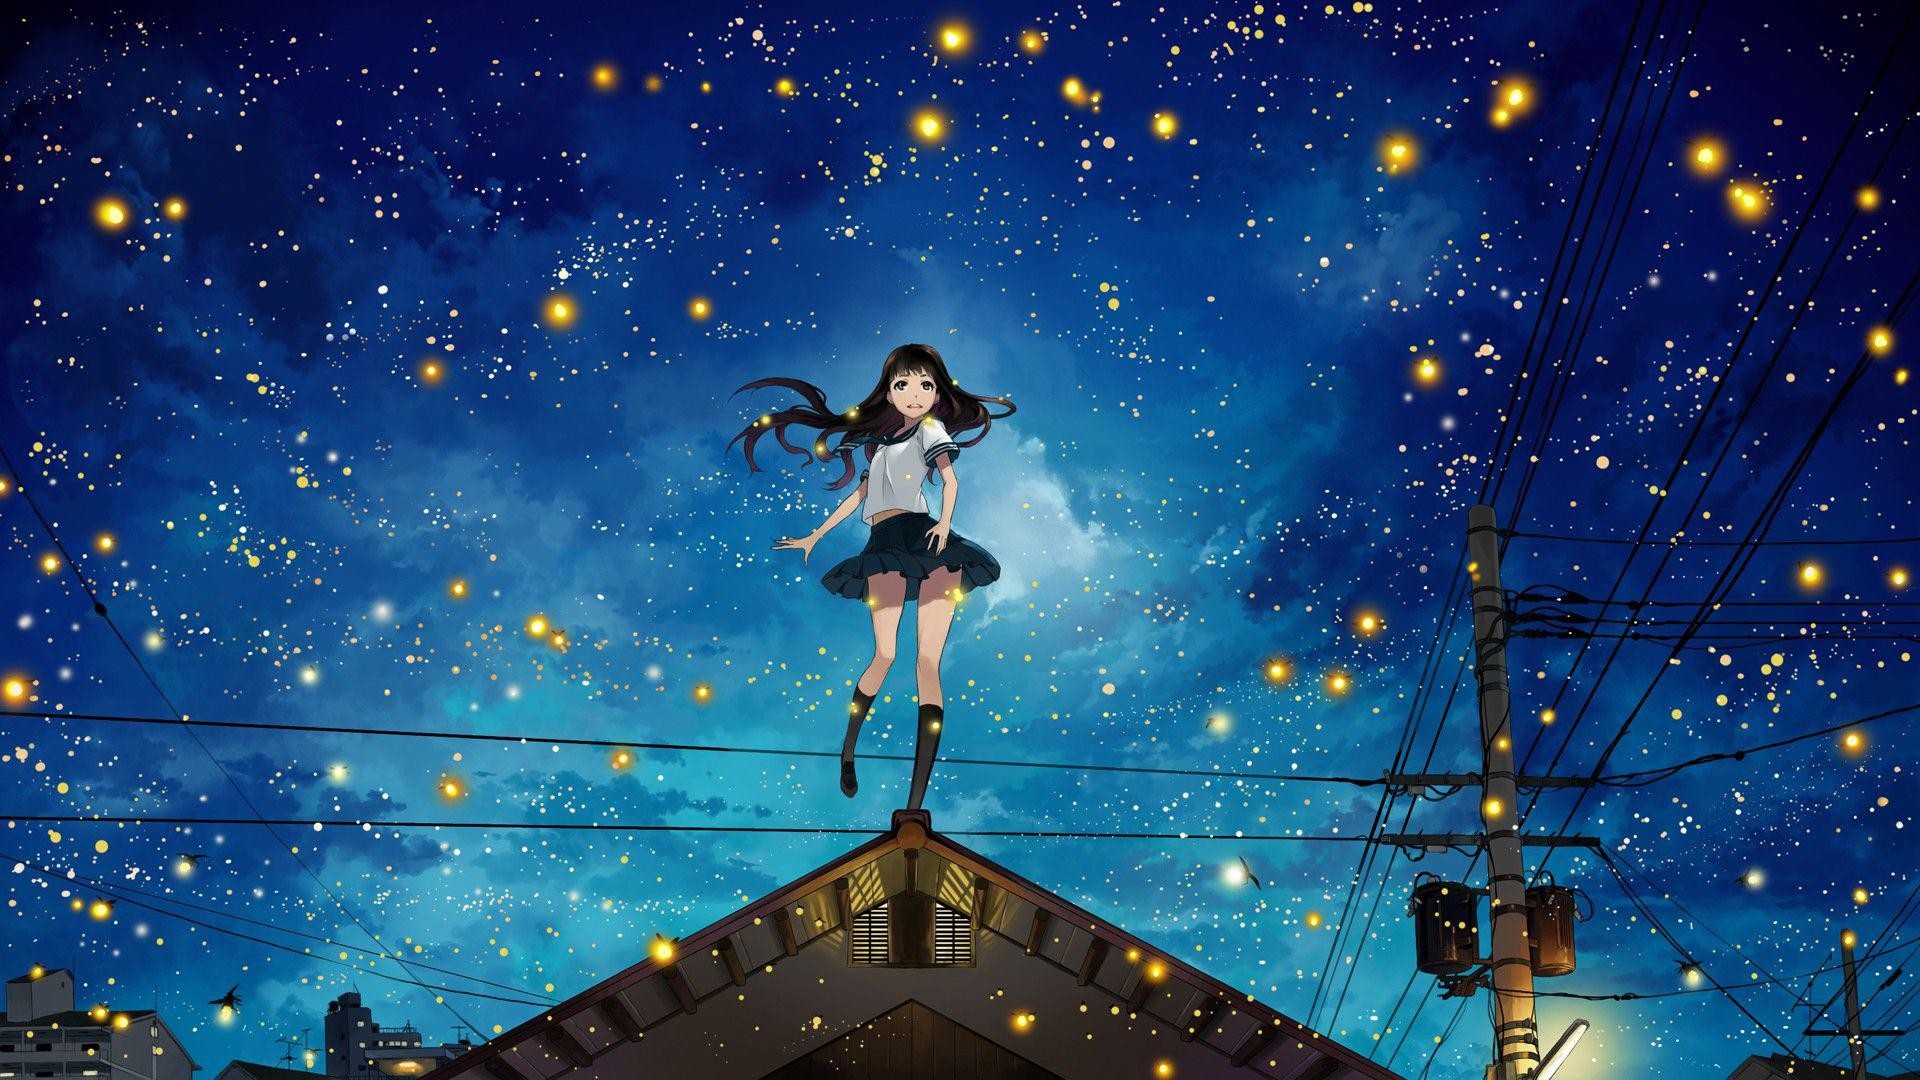 anime wallpapers and backgrounds,sky,space,night,illustration,star